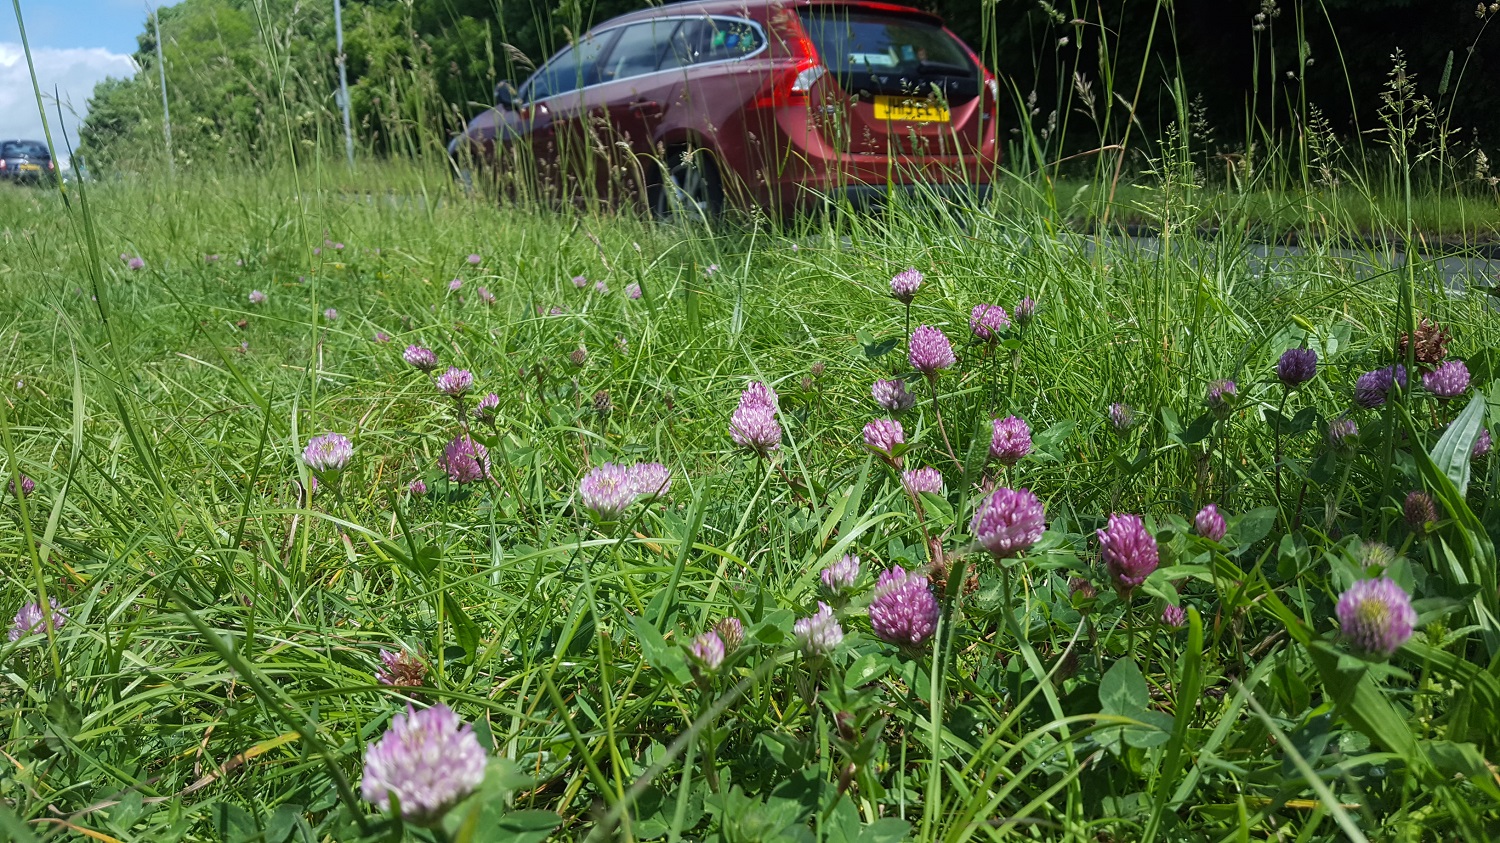 Clover on verge in Pesticide-Free Lewes